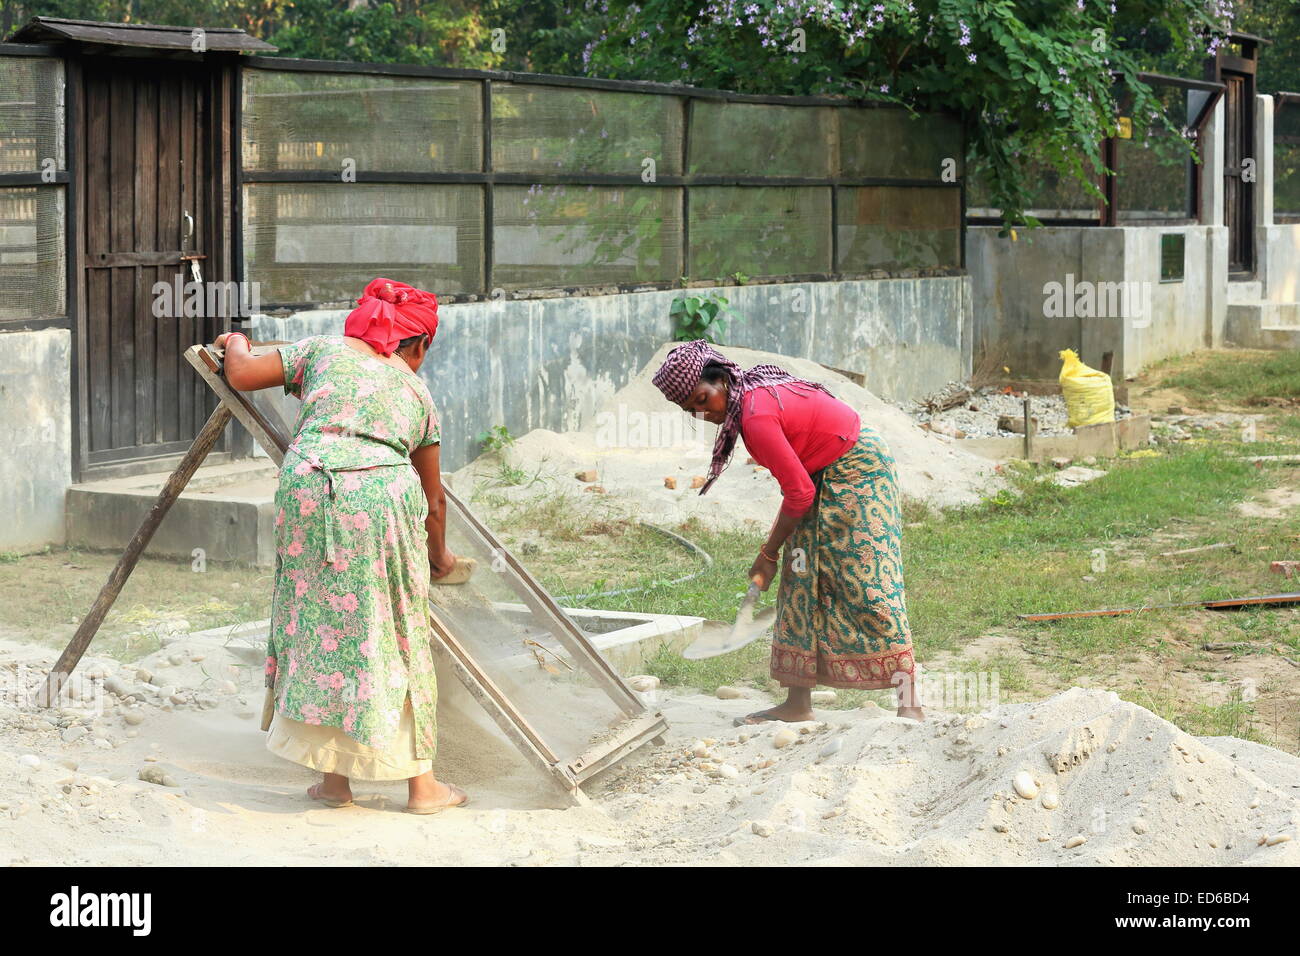 CHITWAN, NEPAL - OCTOBER 14: Local women work in maintenance tasks of the Gharial Conservation Program facilities on October 14, Stock Photo